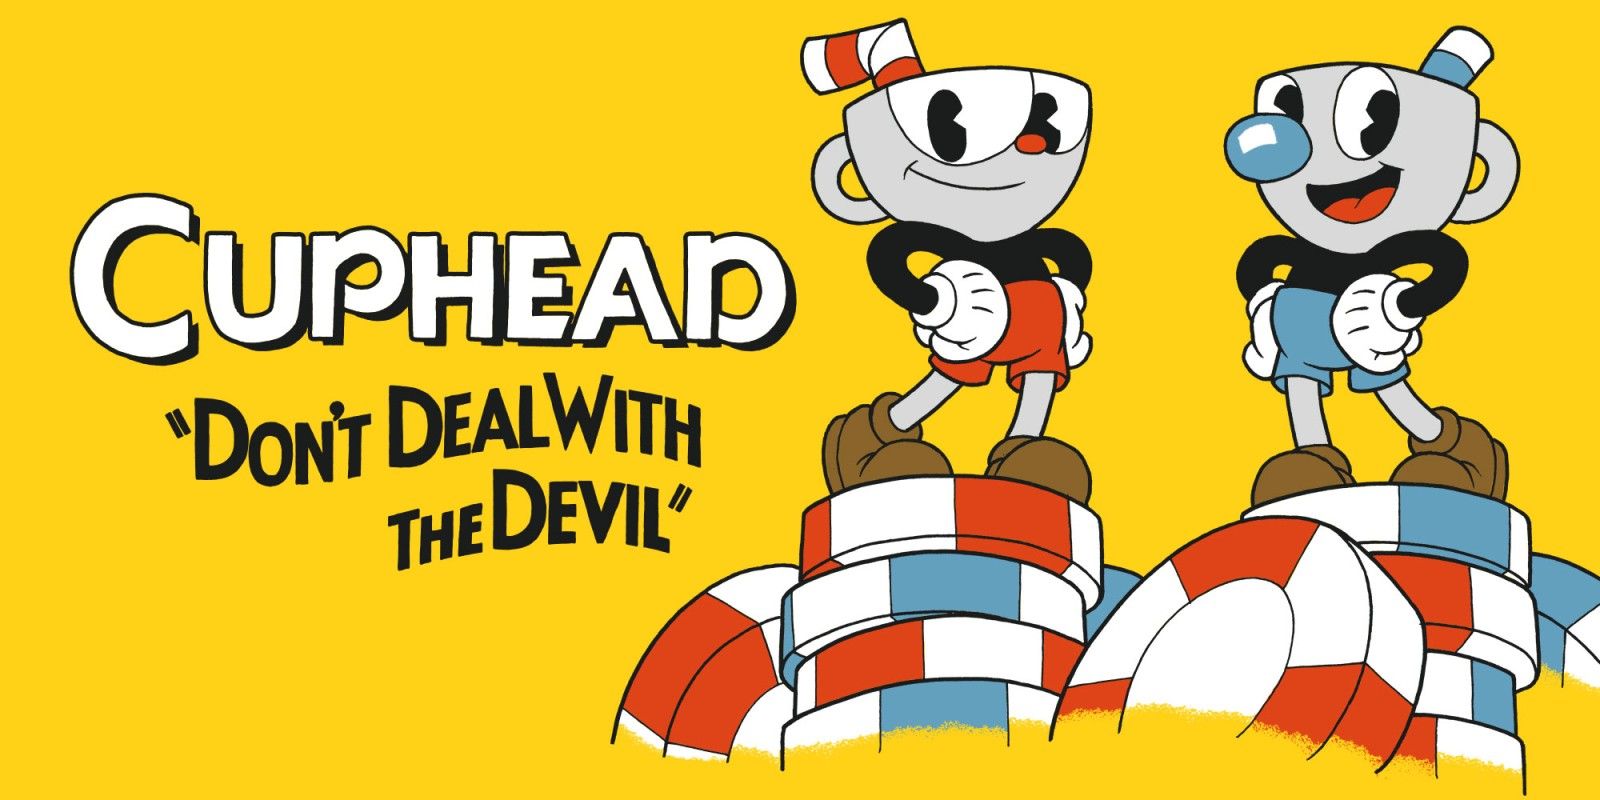 Cuphead Is Getting Bonus Features On Xbox One Following PS4 Release